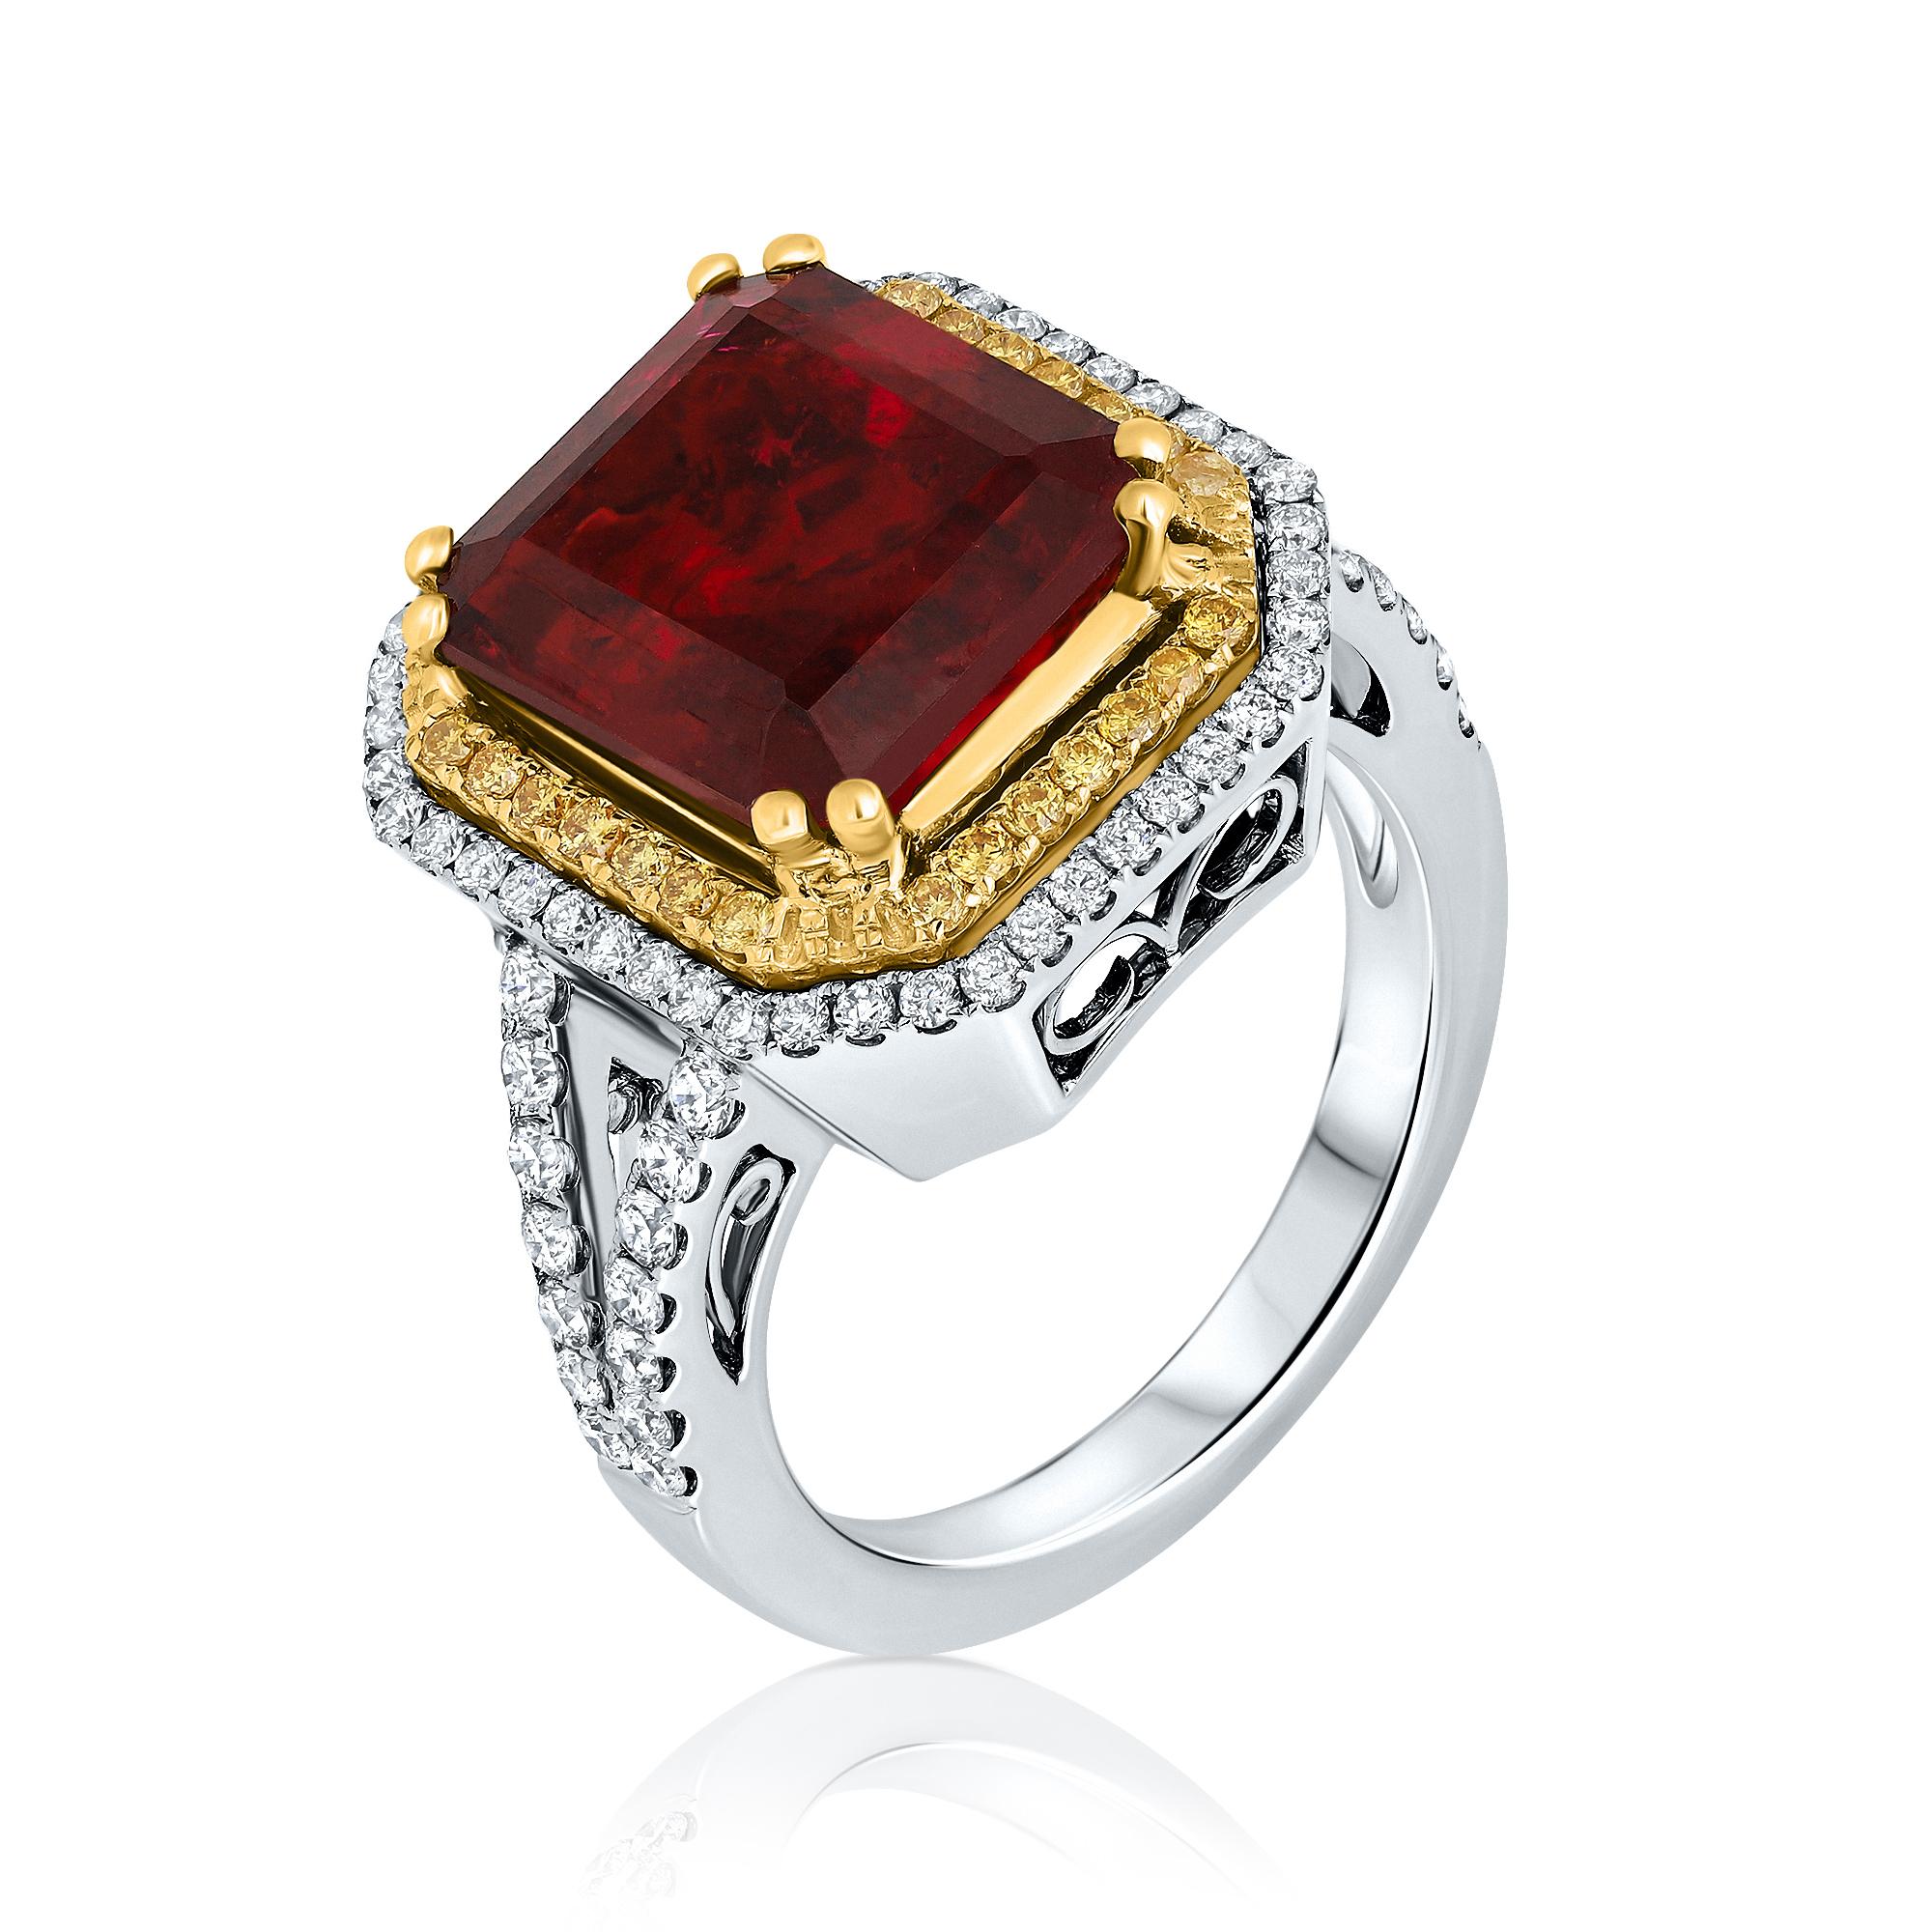 A magnificent 8.90 carat Double Halo ring, featuring 7.47 carat emerald cut Red Tourmaline (Rubellite) set in double halo. This classic design brings out the beauty of the center stone with the surrounding round brilliant yellow diamonds weighing